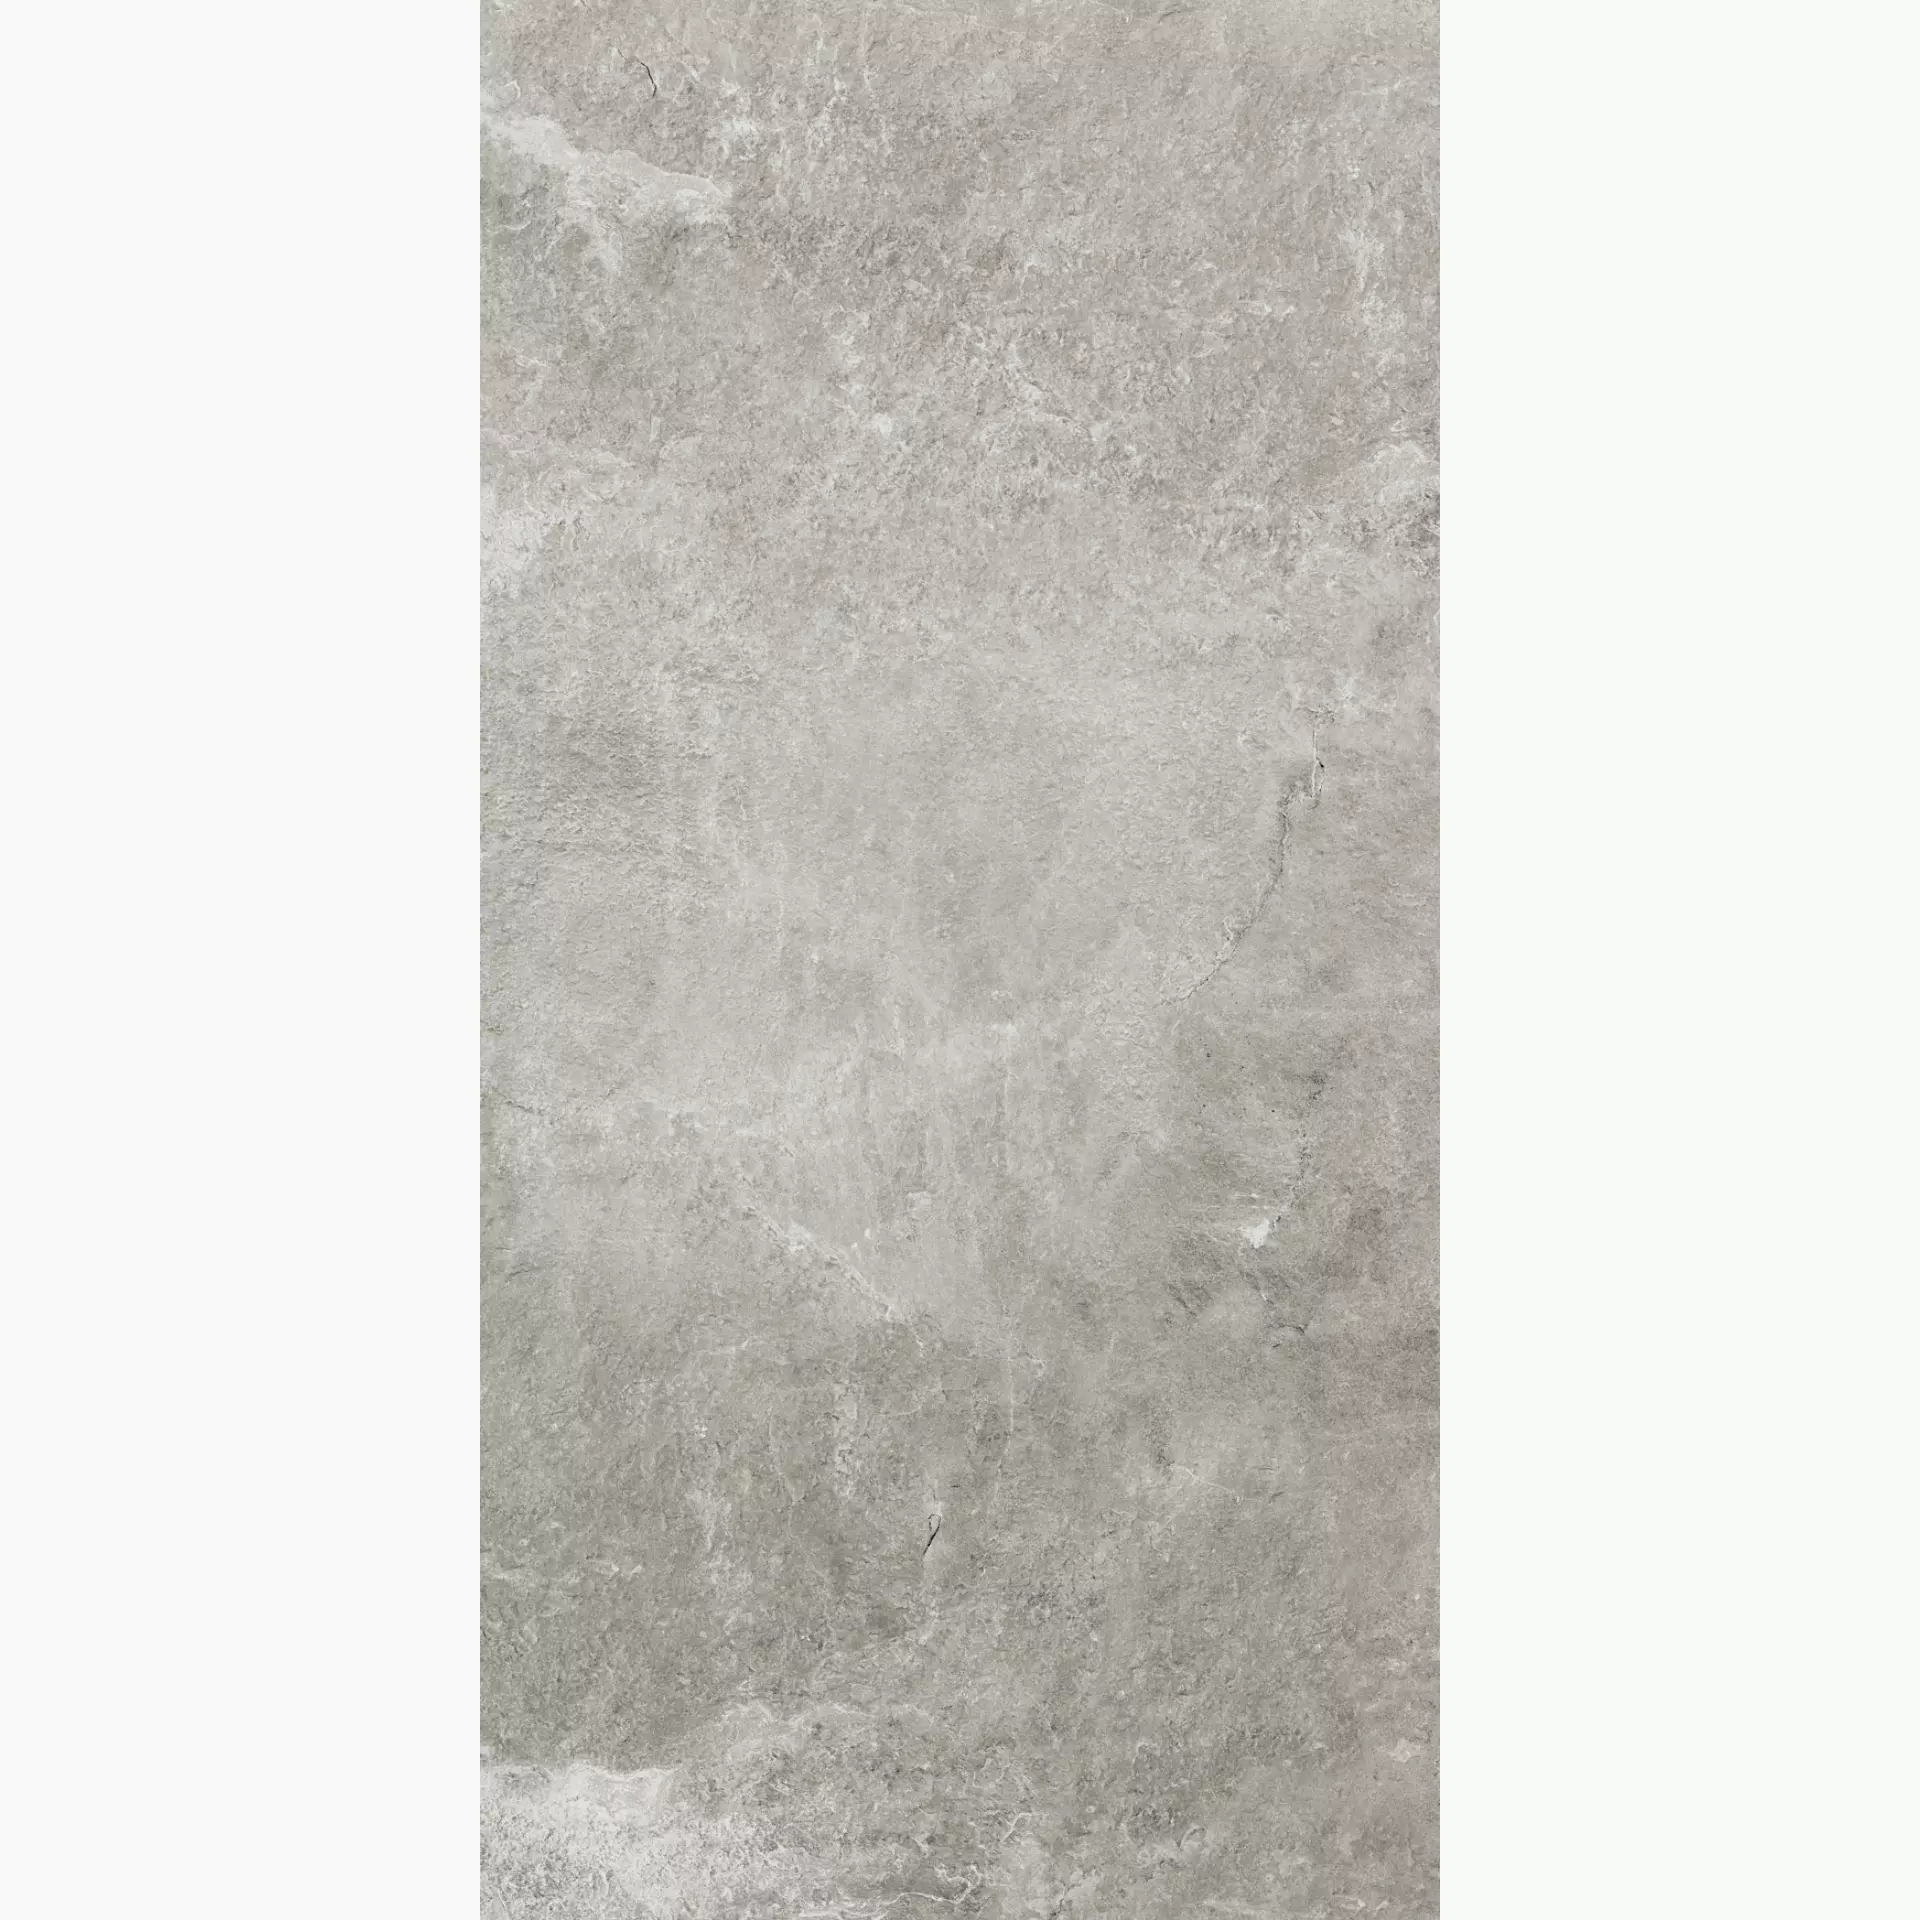 Keope Extreme Grey Strutturato 424E5932 45x90cm rectified 20mm